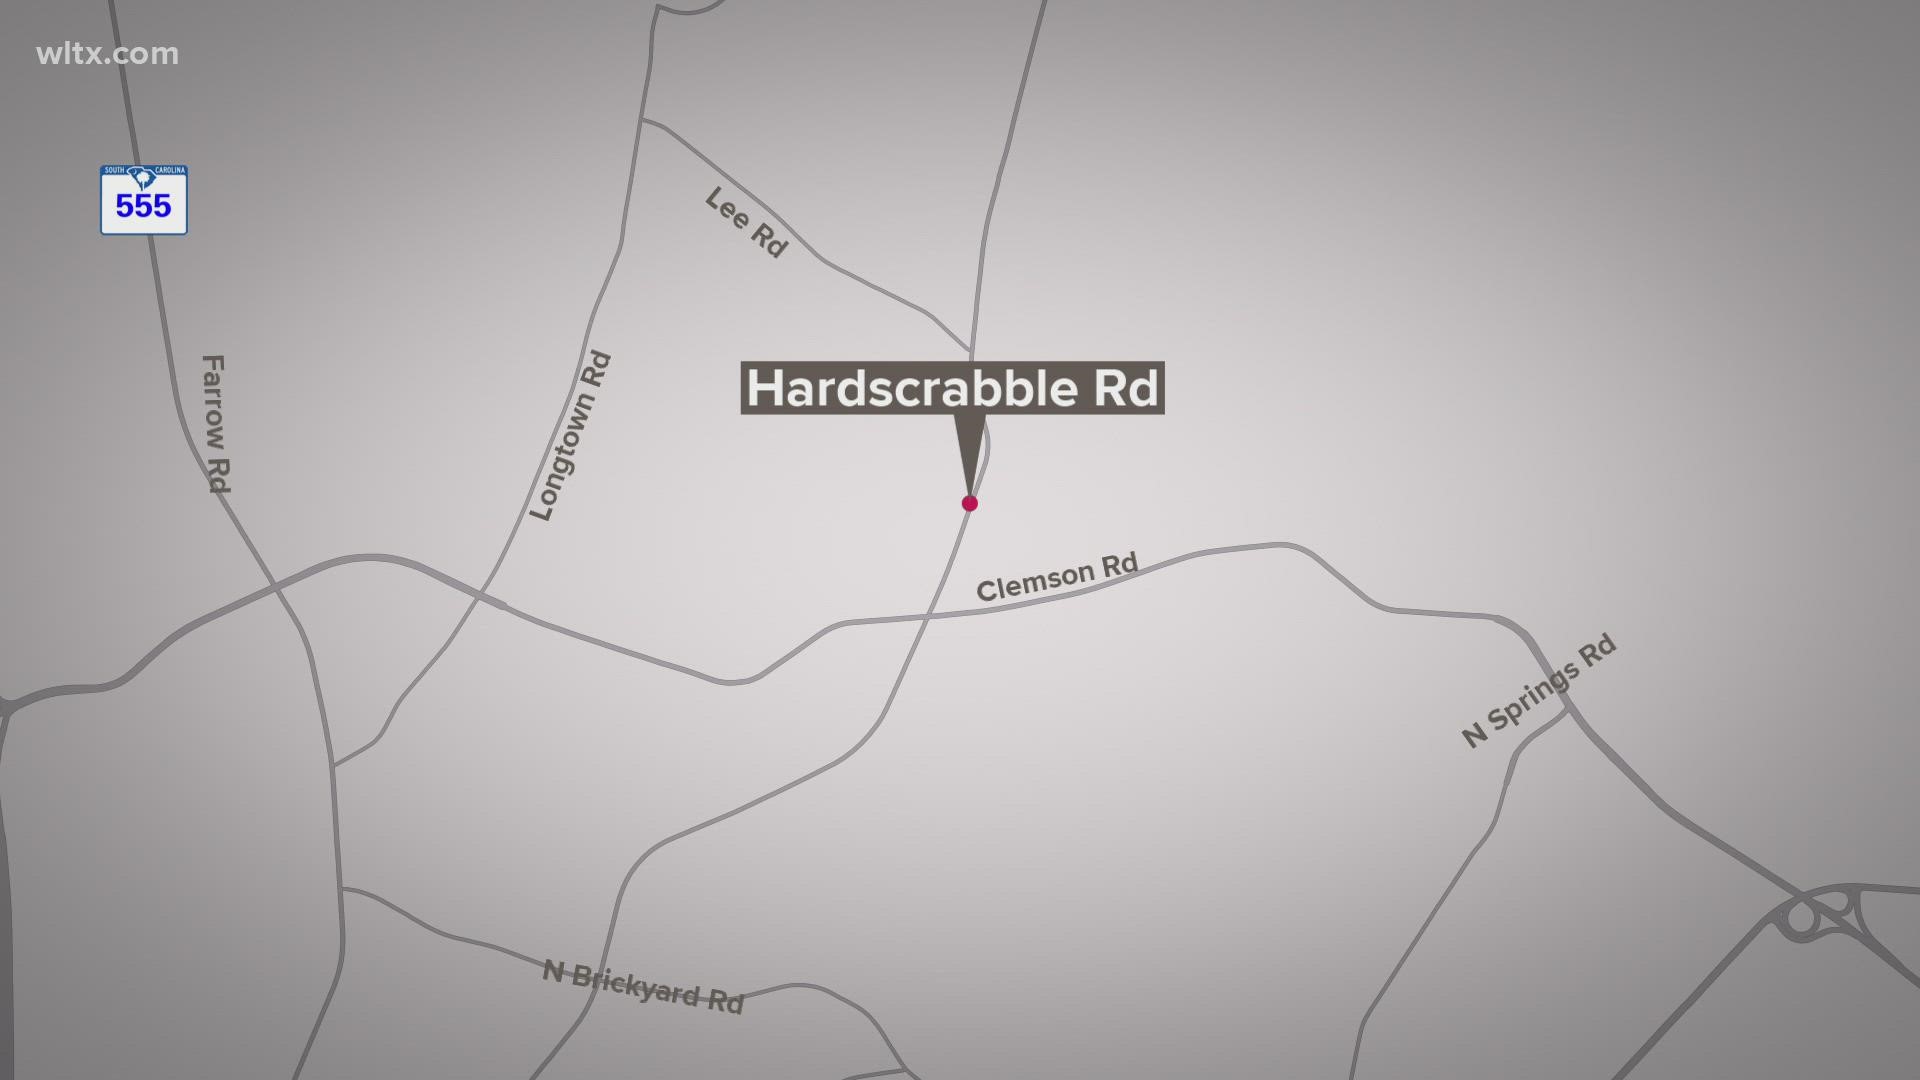 Deputies have arrested a 19-year-old after a deadly shooting on Hardscrabble Road Friday afternoon.